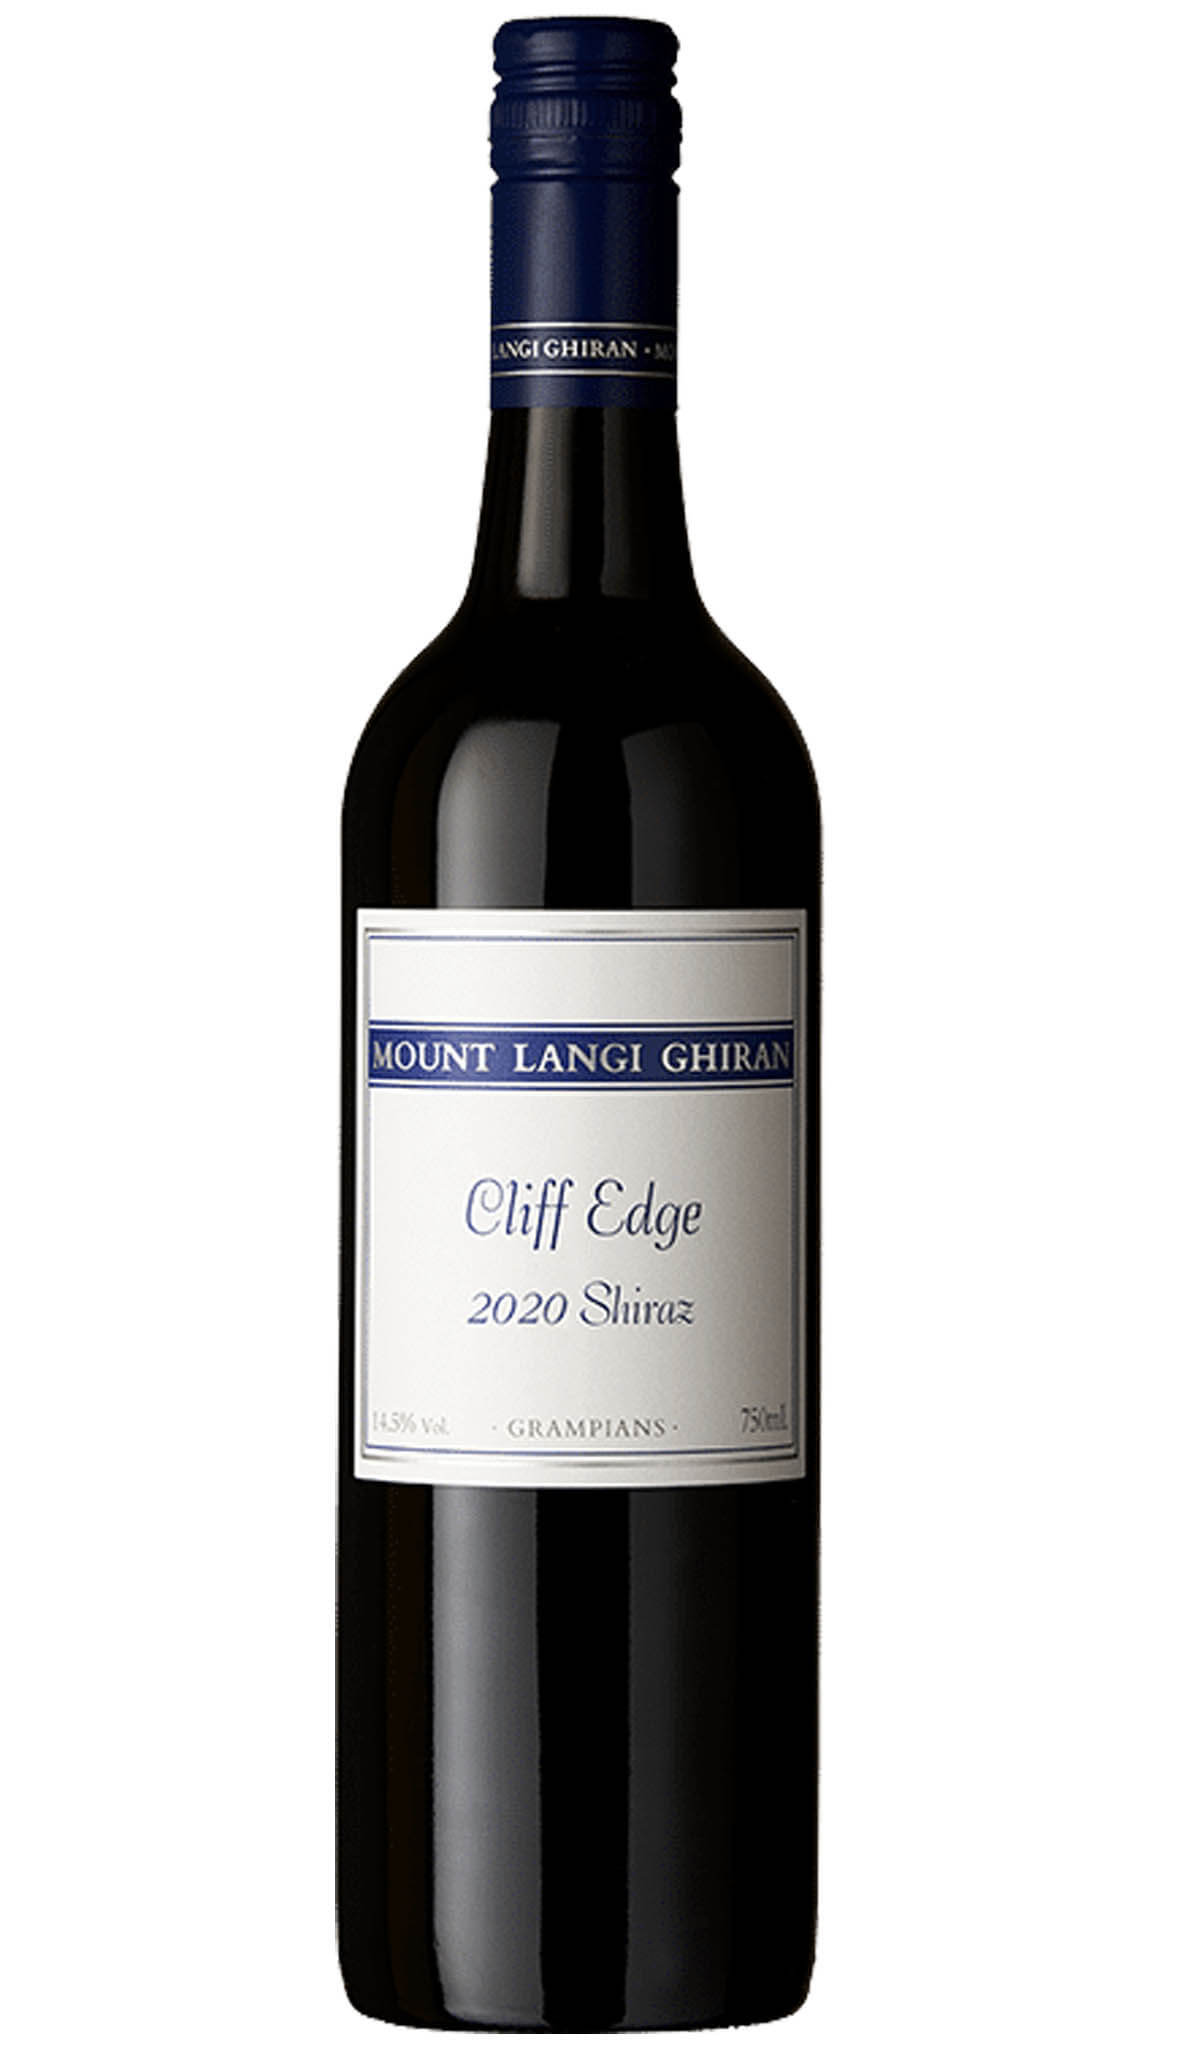 Find out more or buy Mount Langi Ghiran Cliff Edge Shiraz 2020 (Grampians) online at Wine Sellers Direct - Australia’s independent liquor specialists.